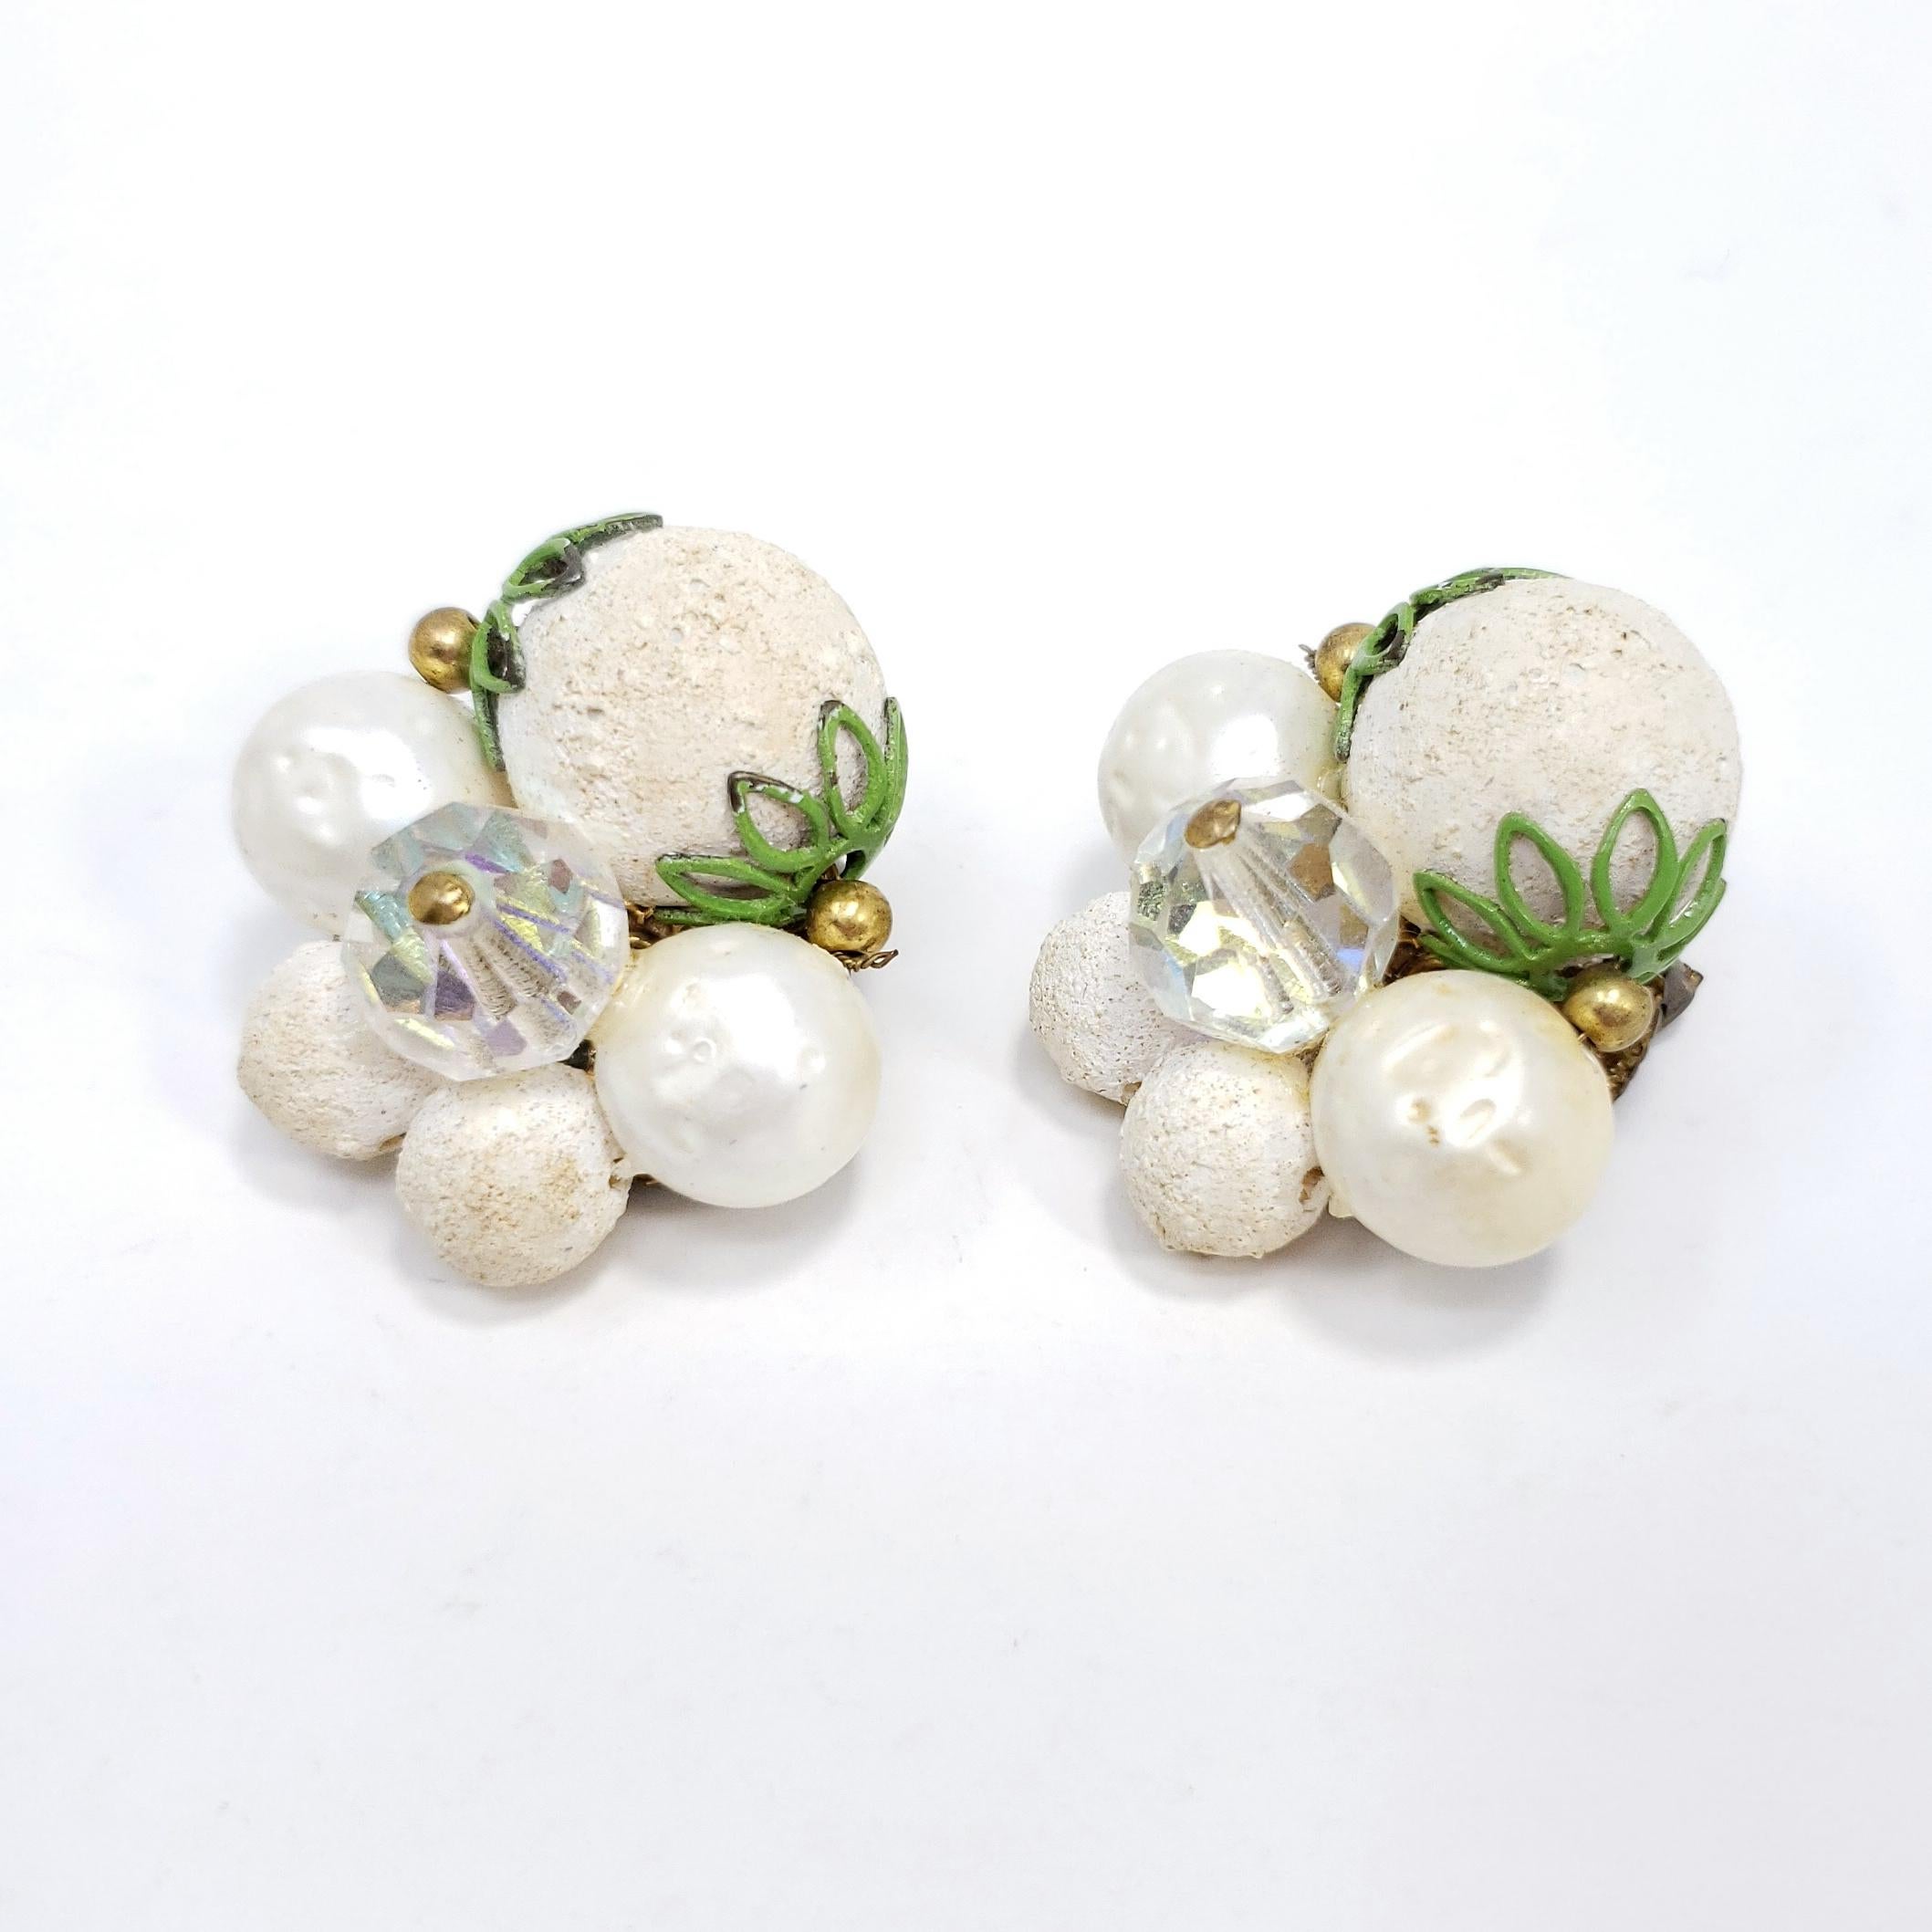 Retro chic! These vintage clip on earrings feature a cluster of textured white beads with green and brass accents.

Circa mid 1900s. Brass-tone.